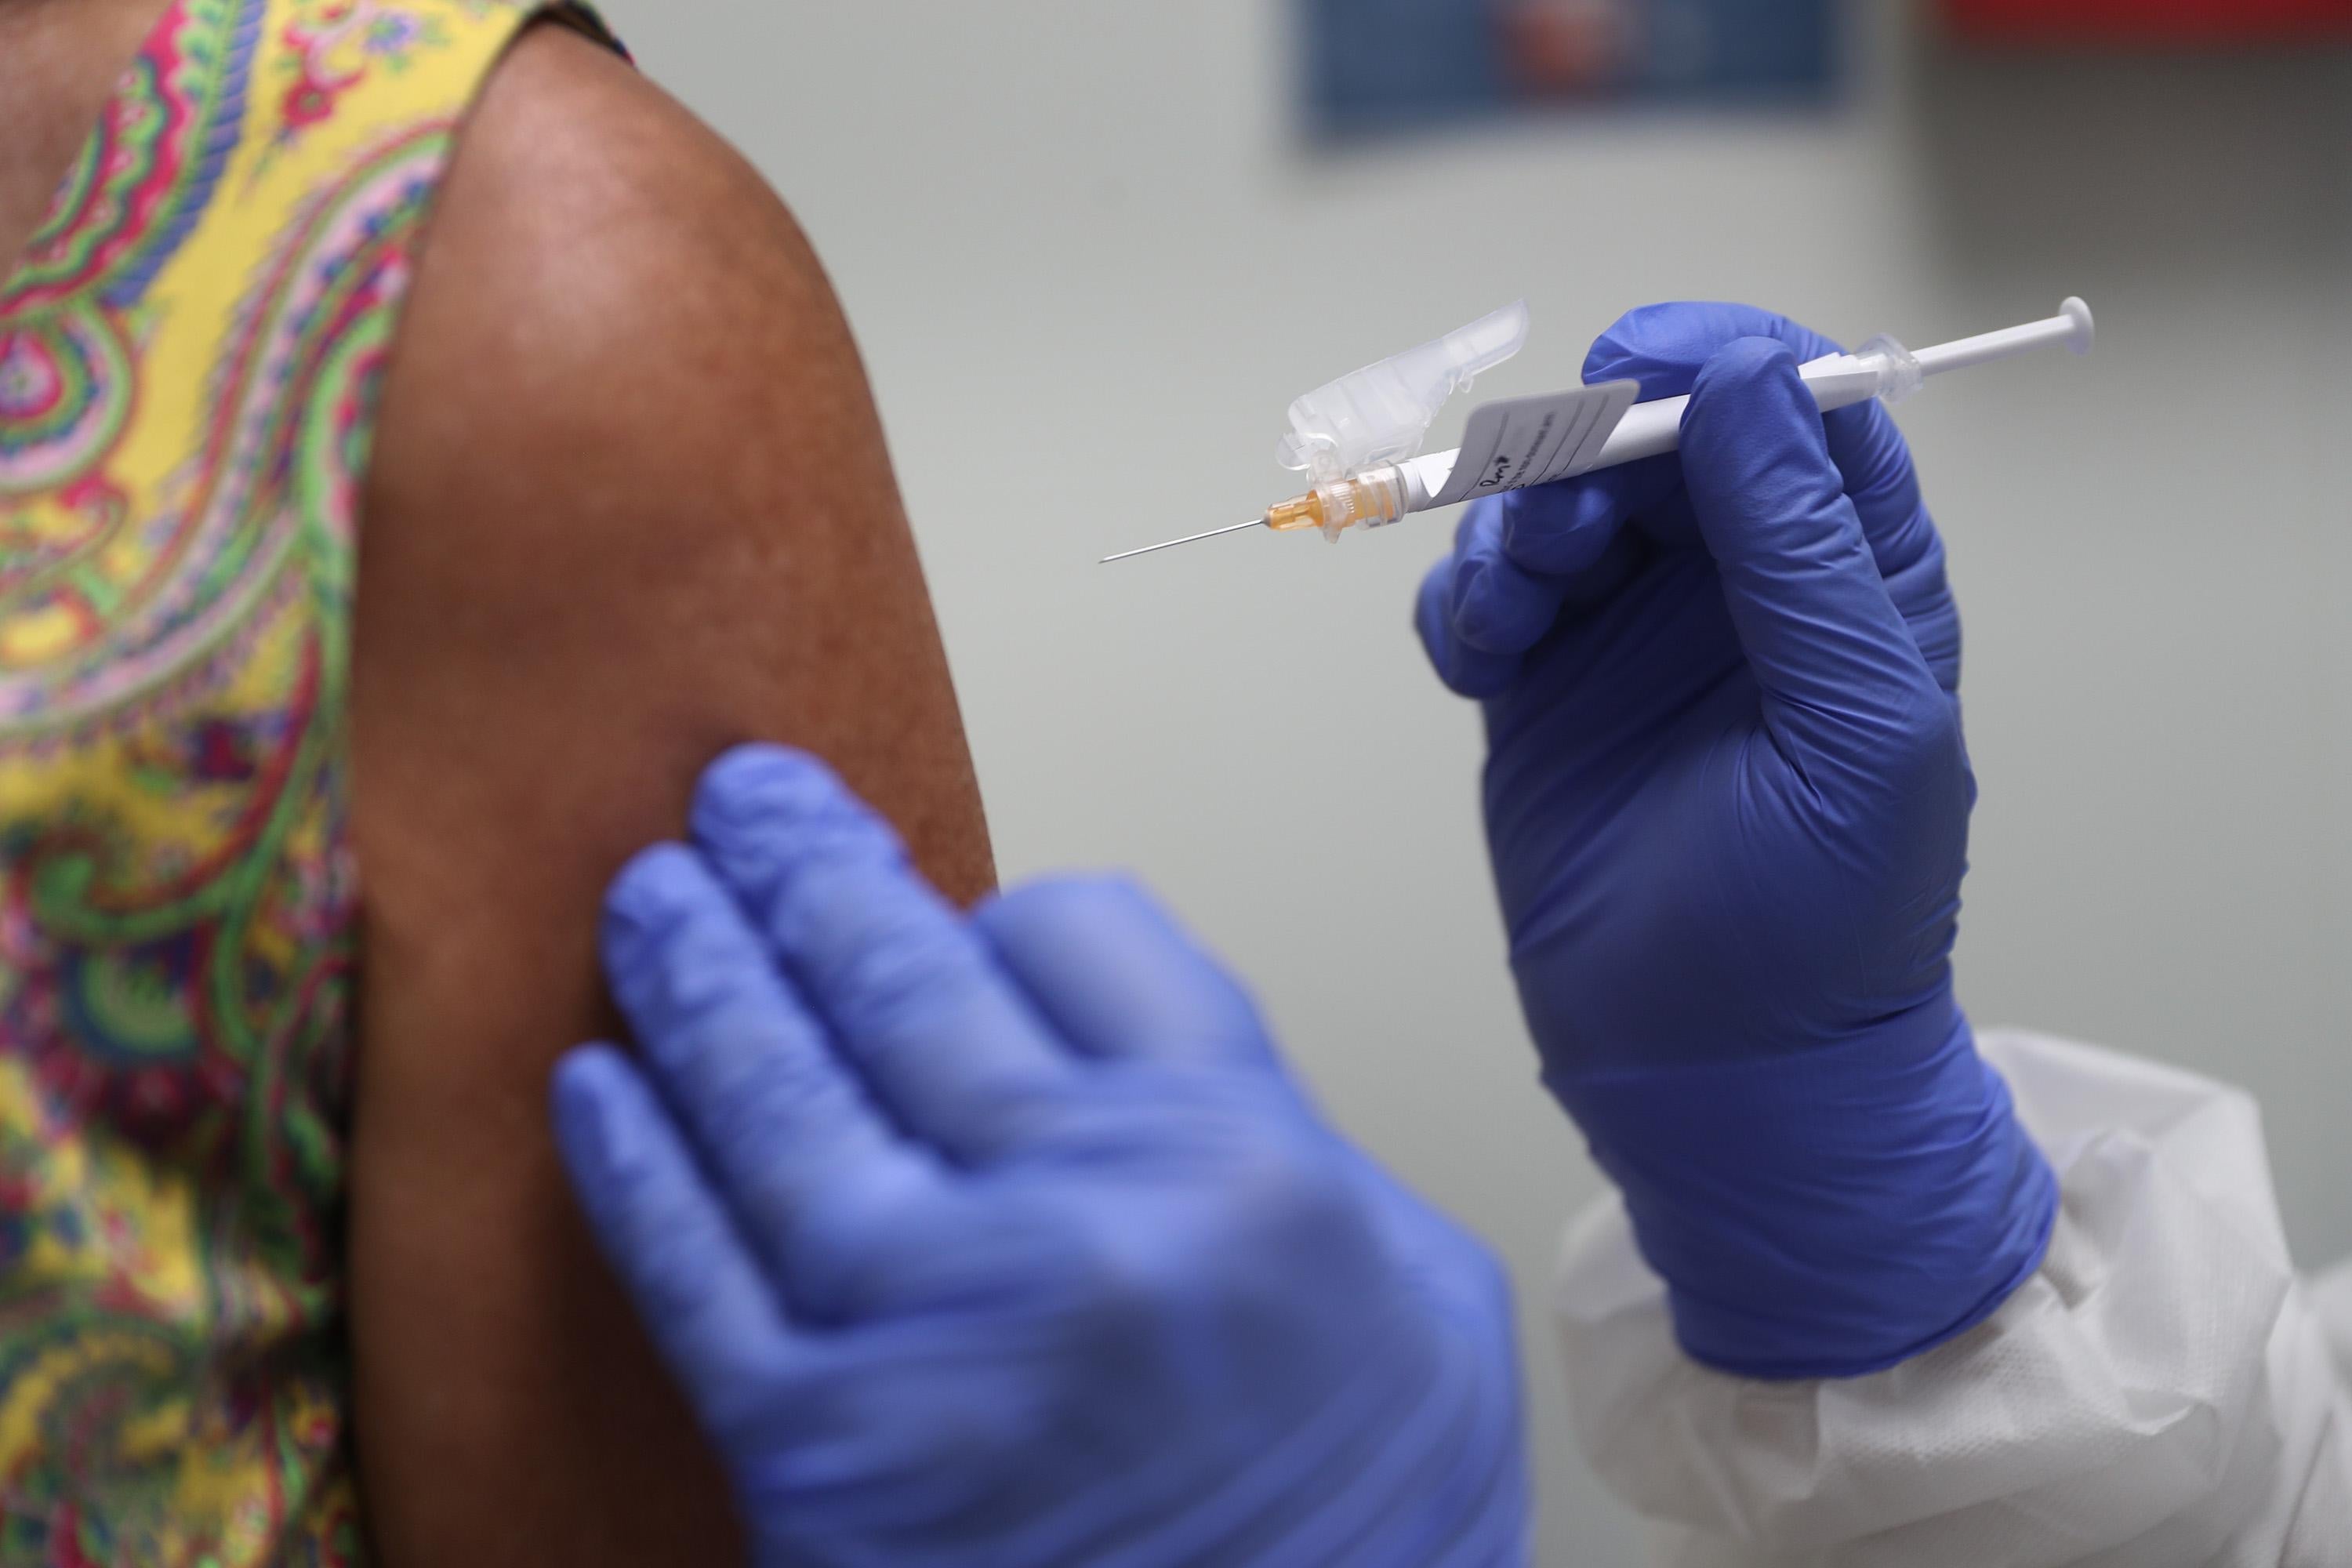 Lisa Taylor receives a COVID-19 vaccination from RN Jose Muniz as she takes part in a vaccine study at Research Centers of America on August 7, 2020 in Hollywood, Florida.